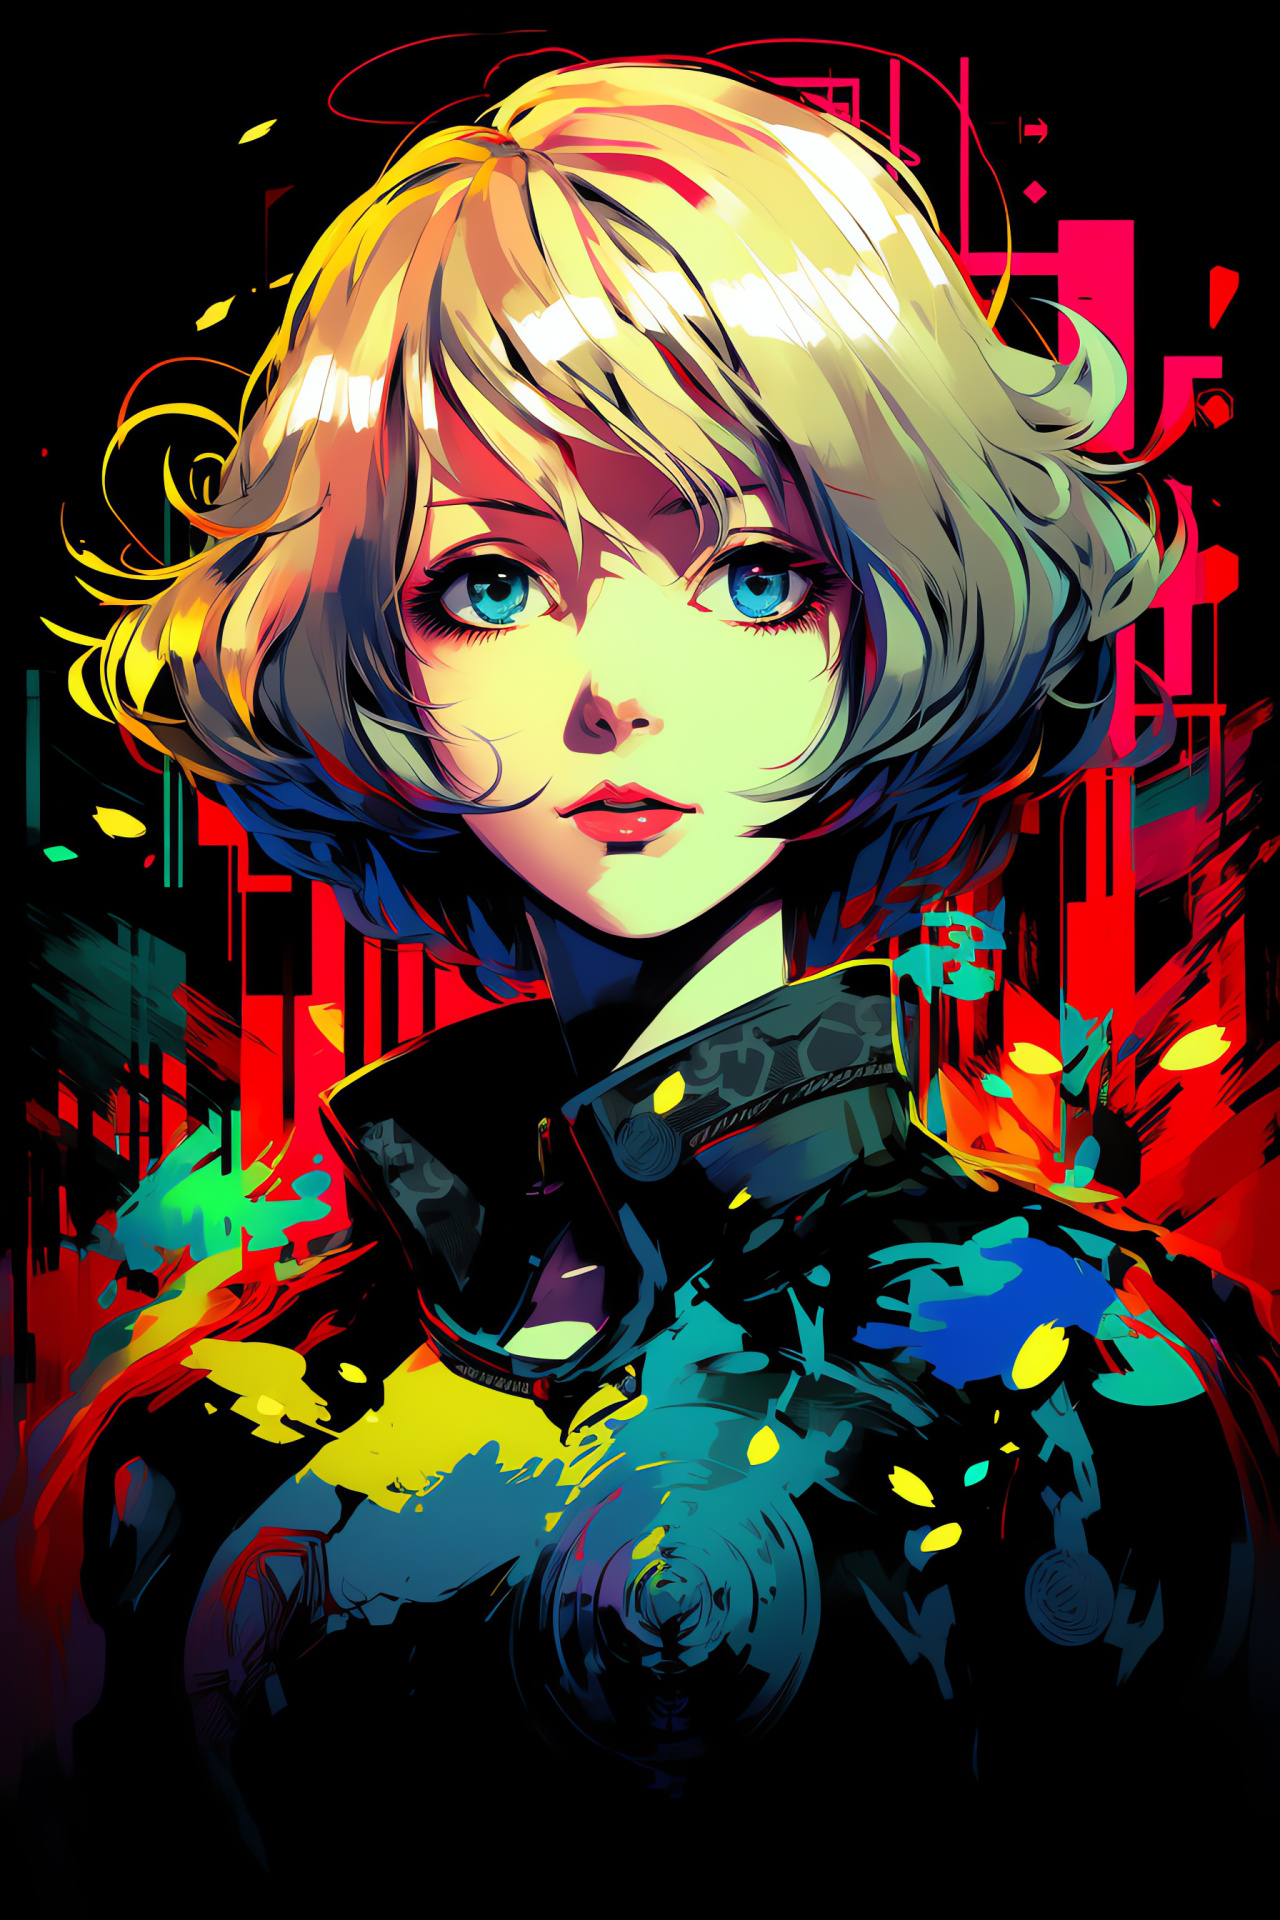 Persona 3 Aigis imagery, Neon aesthetic in setting, Illustrated digital art, Gameplay visuals, HD Phone Image